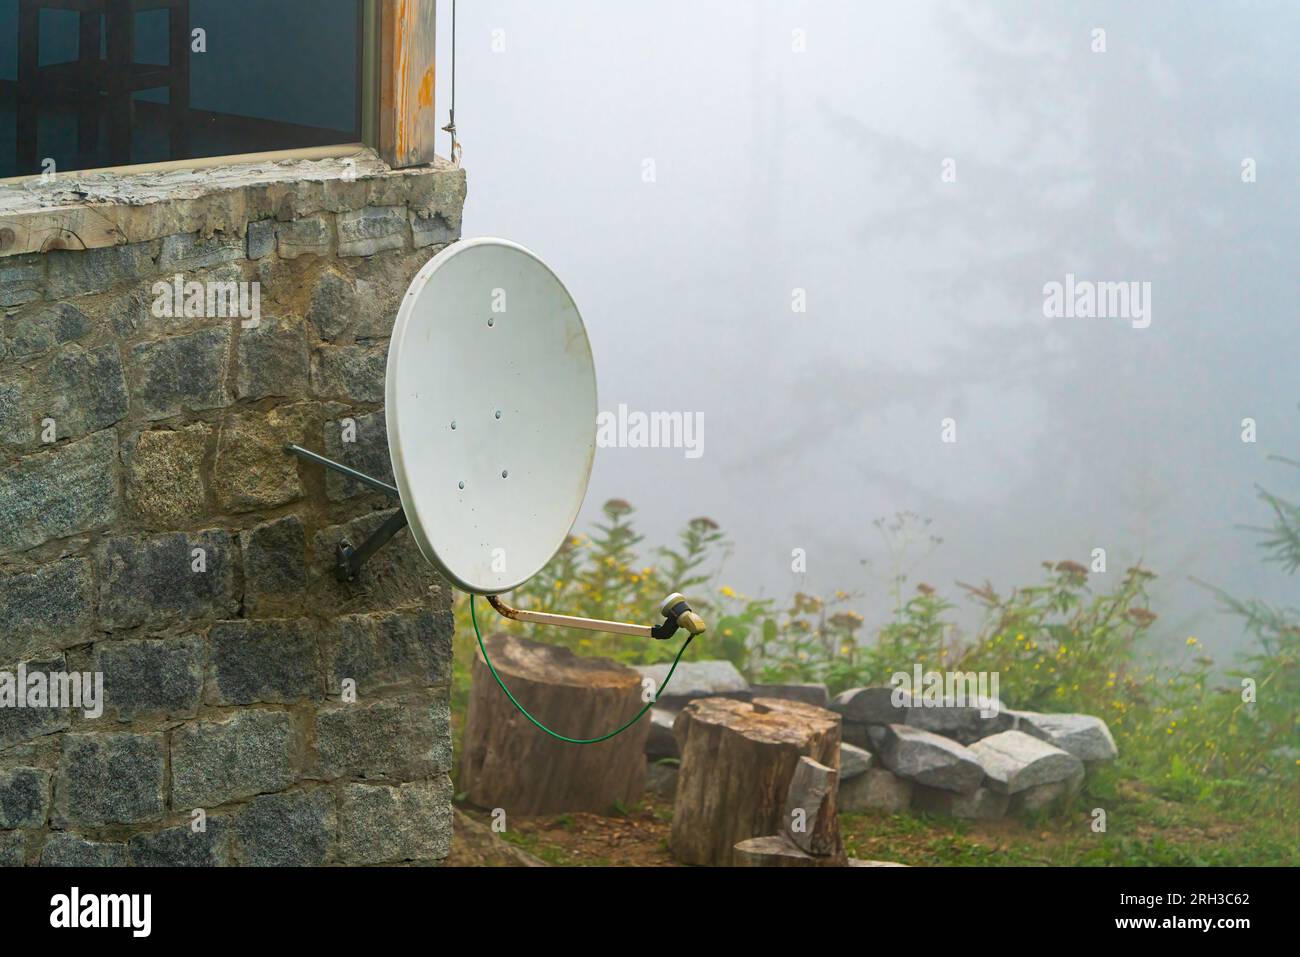 House satellite antenna used for TV broadcasts in Turkey. Stock Photo